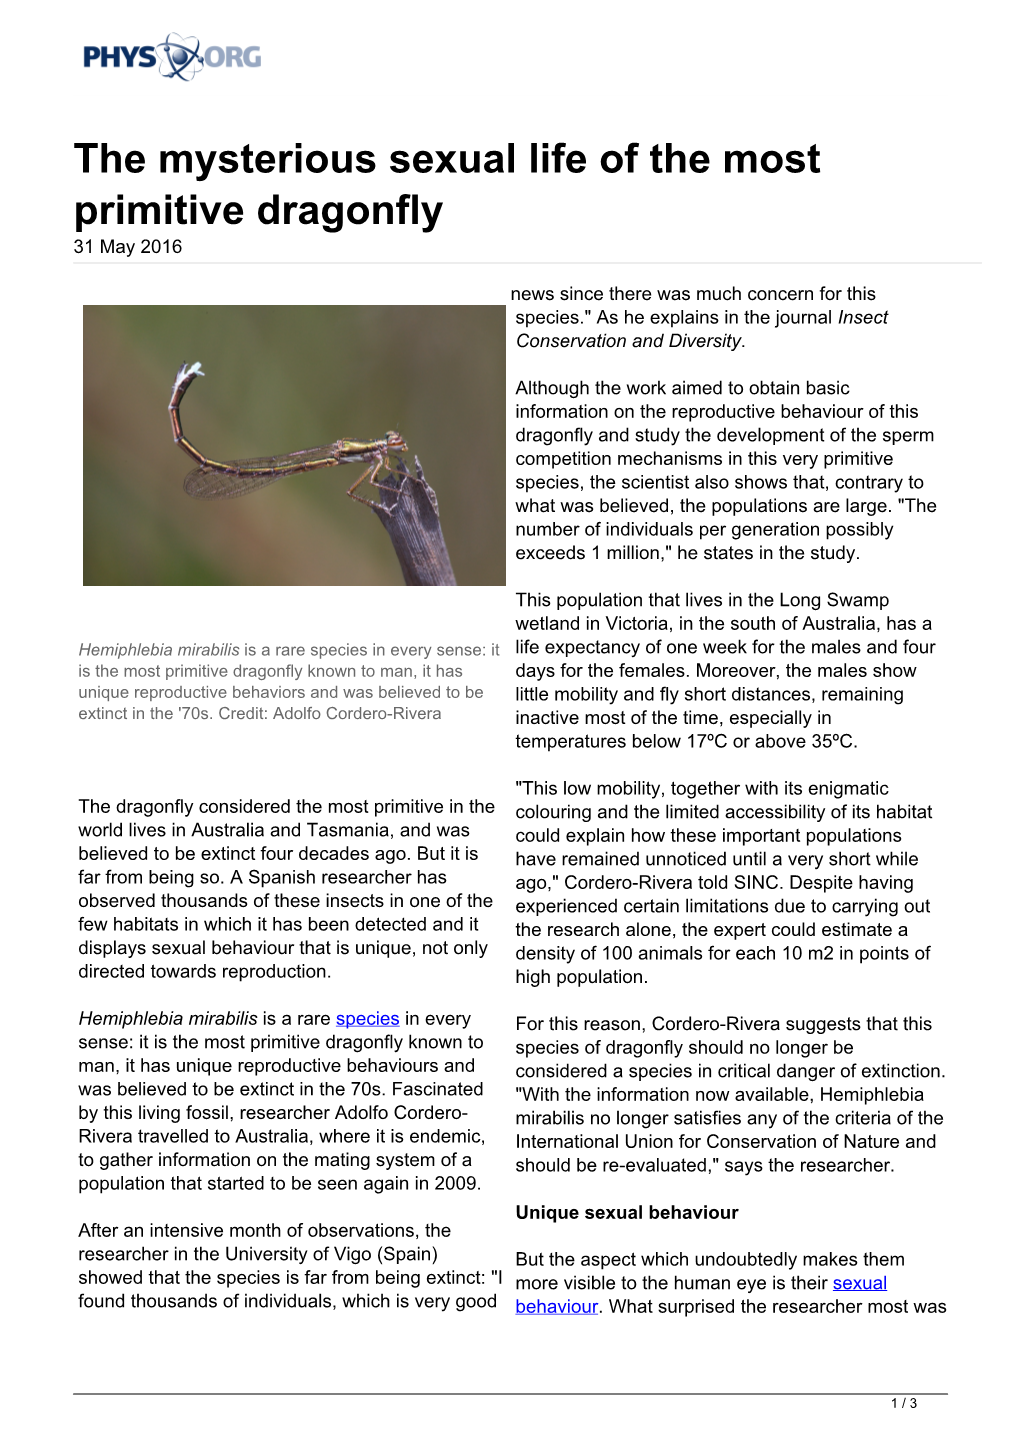 The Mysterious Sexual Life of the Most Primitive Dragonfly 31 May 2016